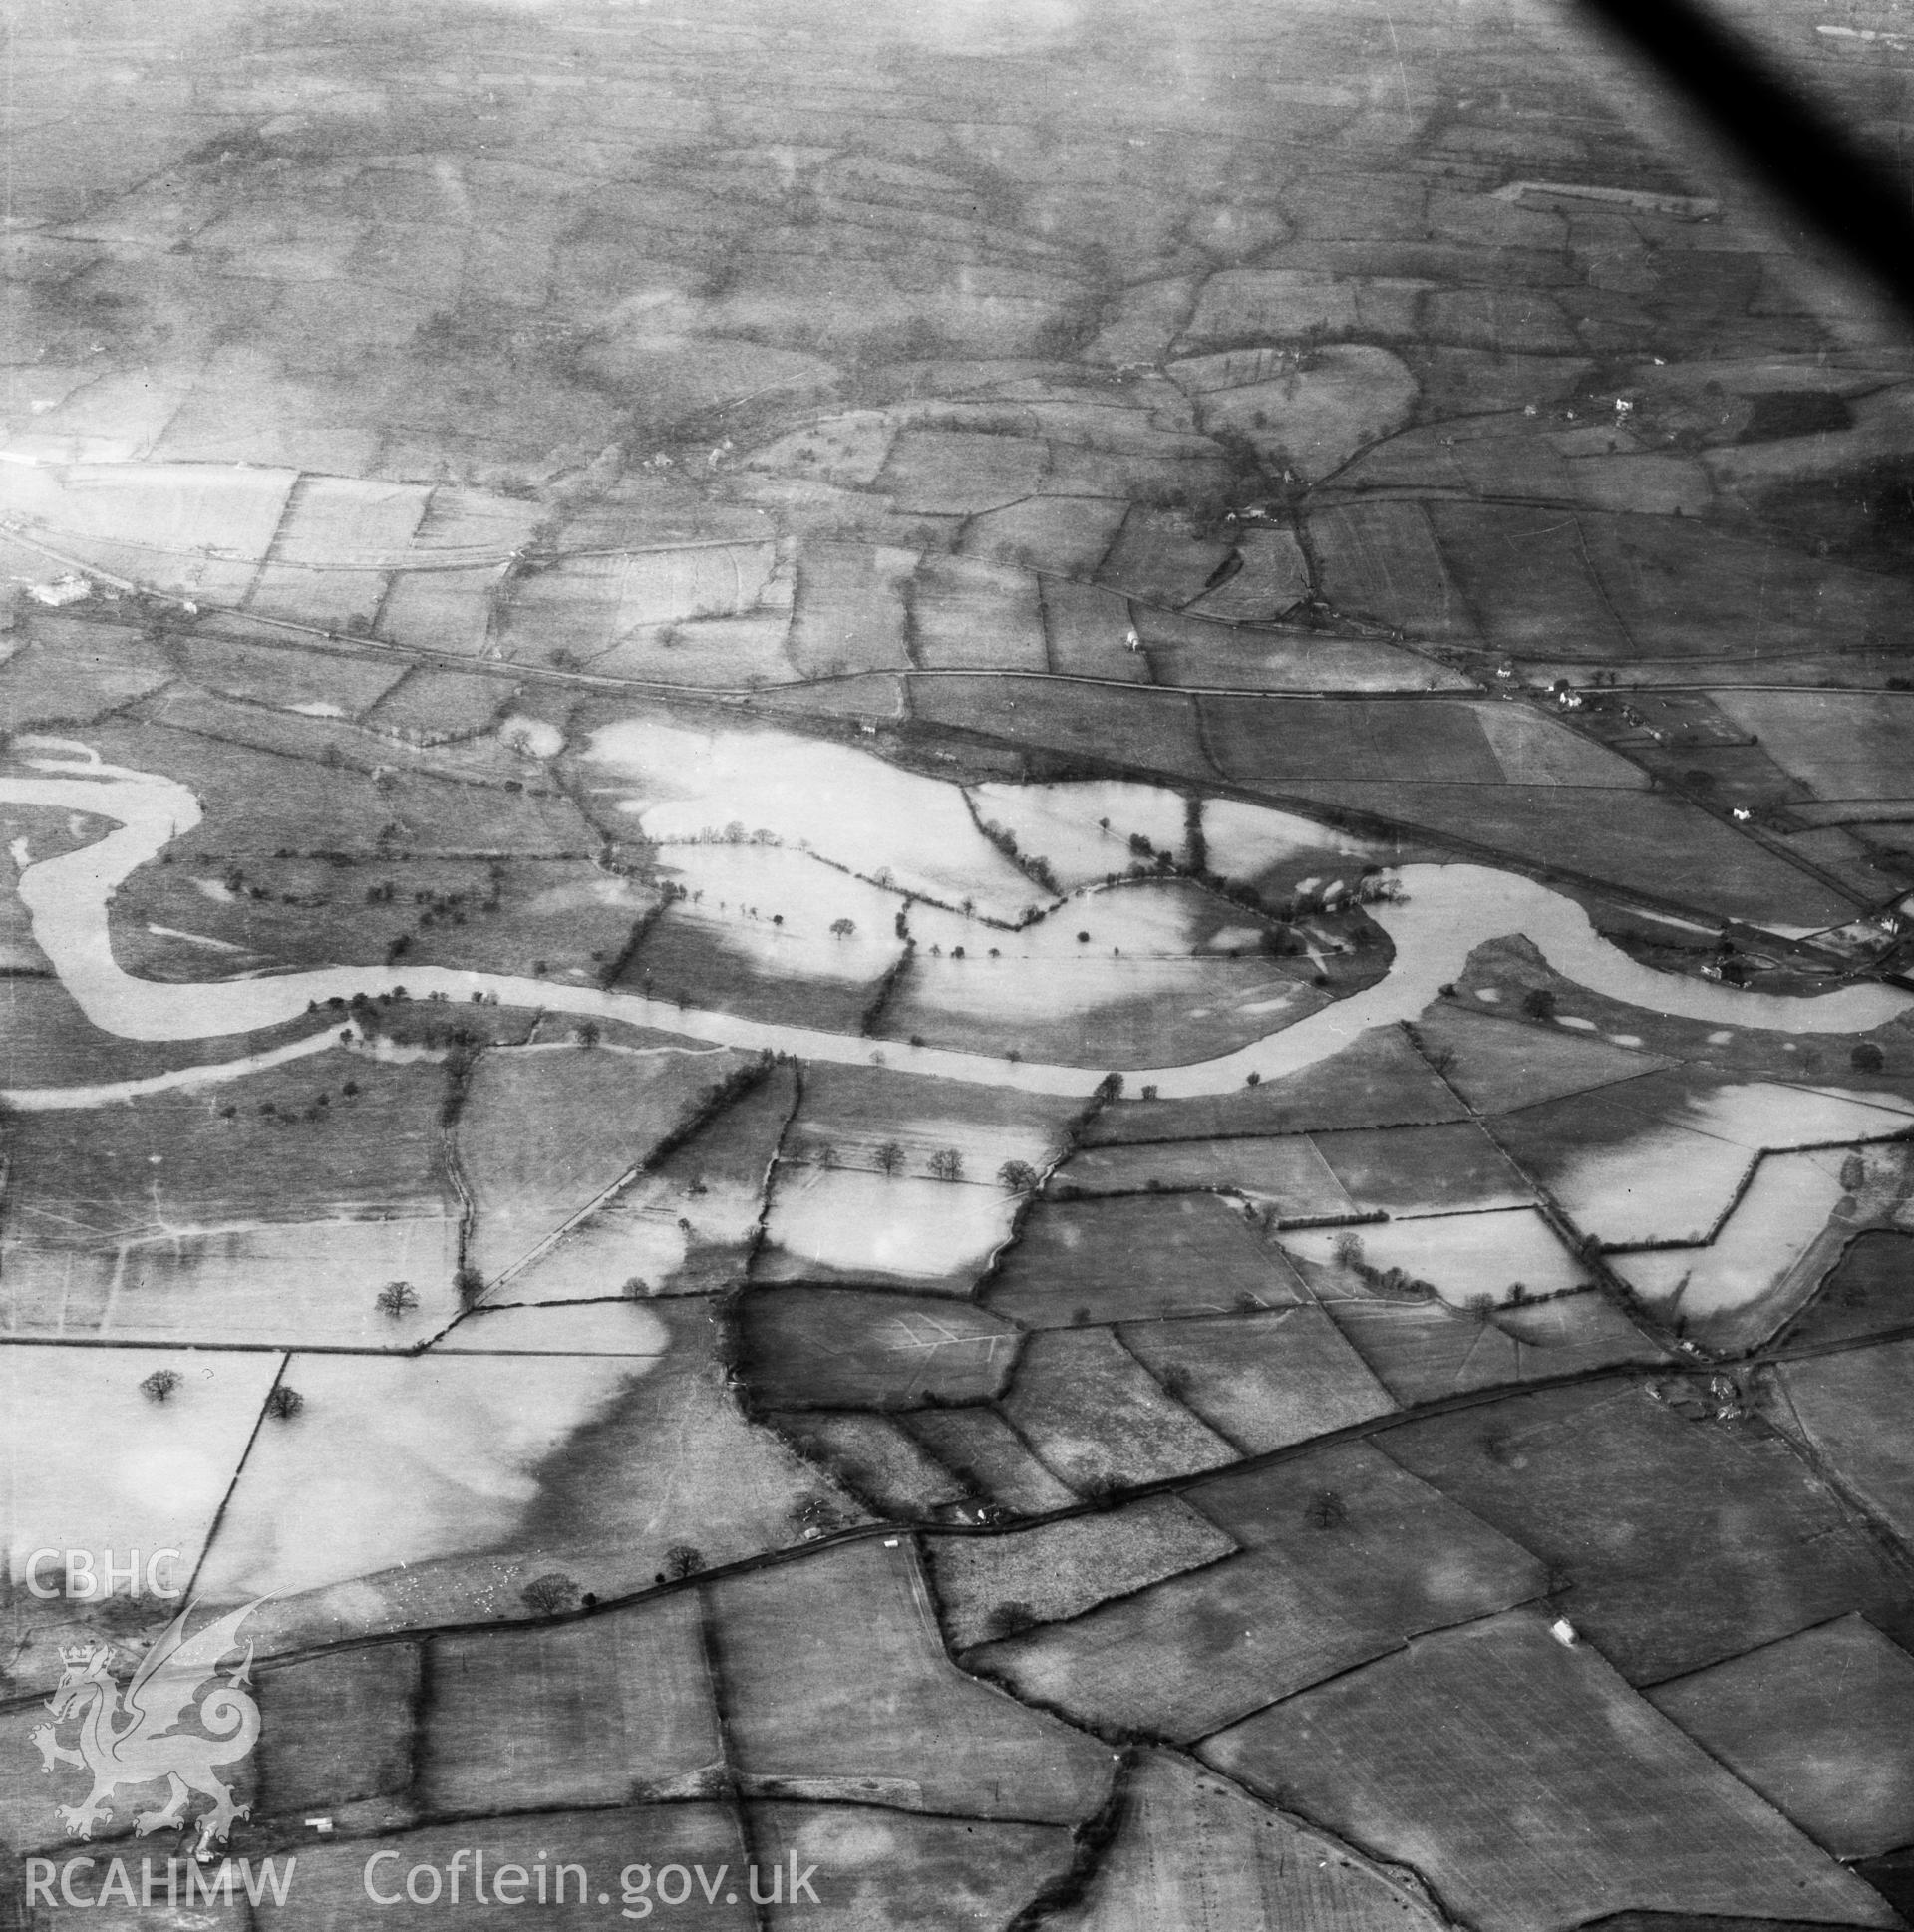 View of the river Severn in flood in the Criggion and Breiddan Hill area. Oblique aerial photograph, 5?" cut roll film.